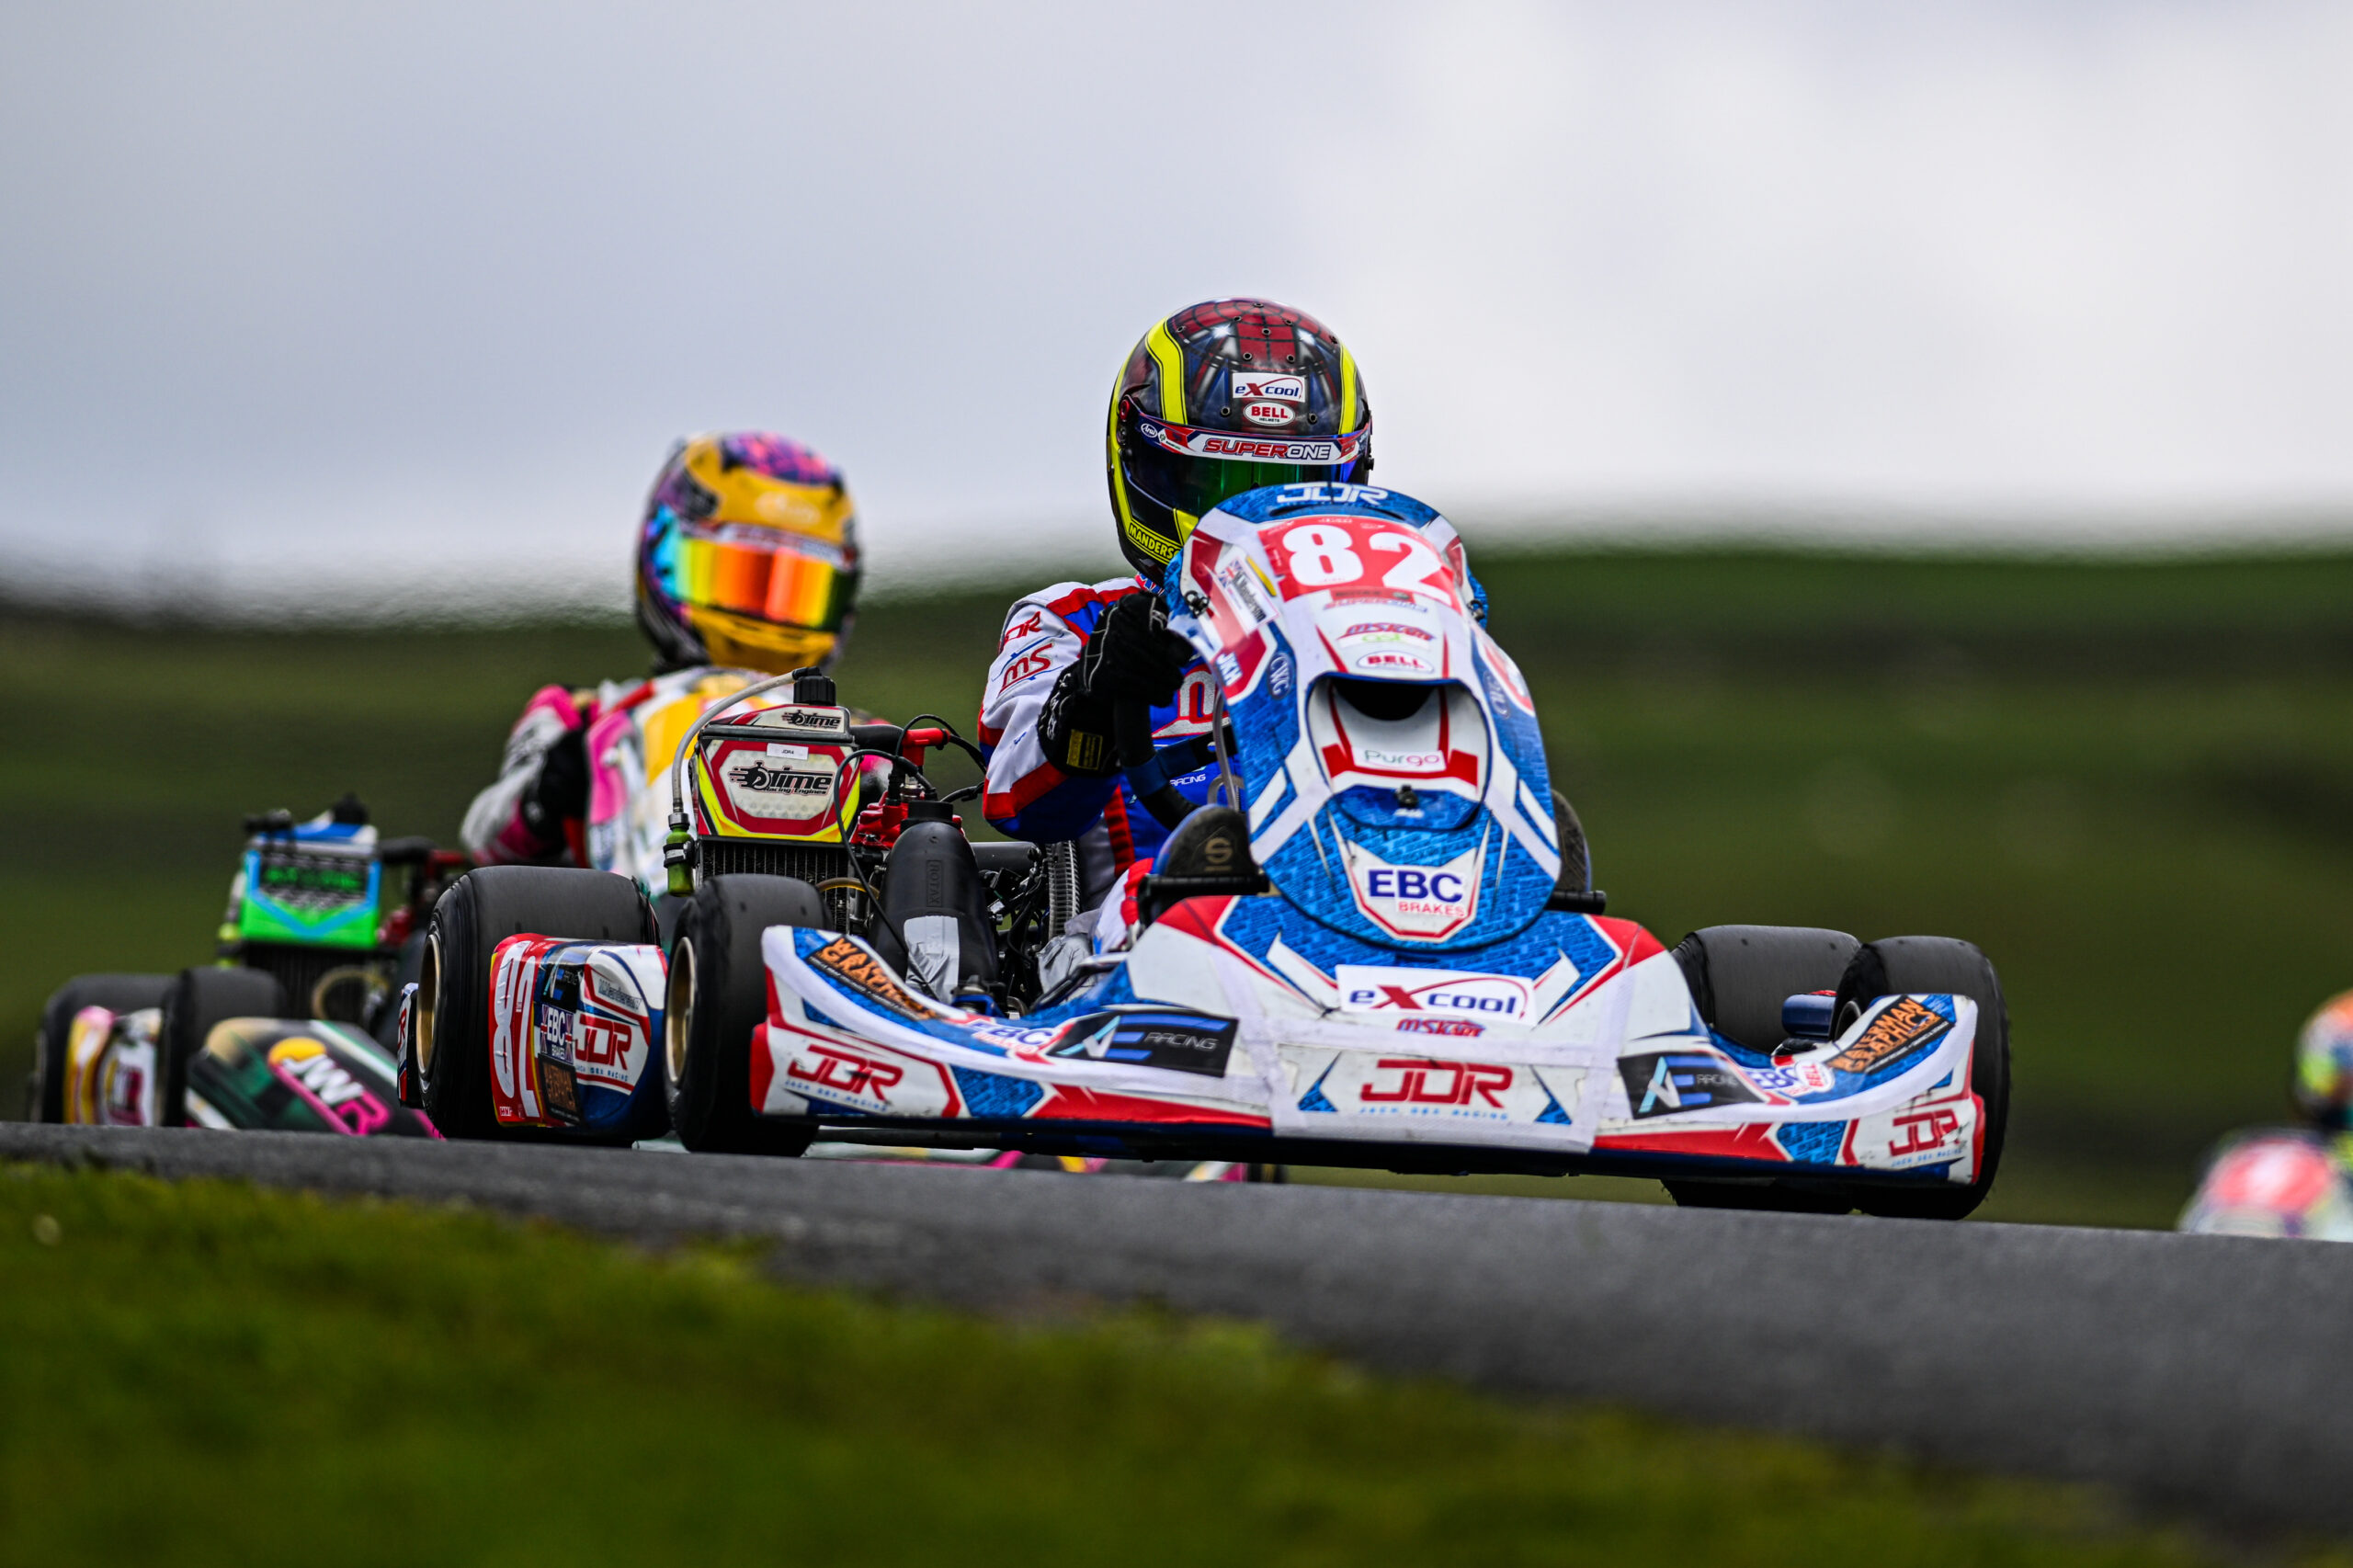 EBC-Equipped Junior Max Kart Racers Show Promise at First Super One 2023 Round